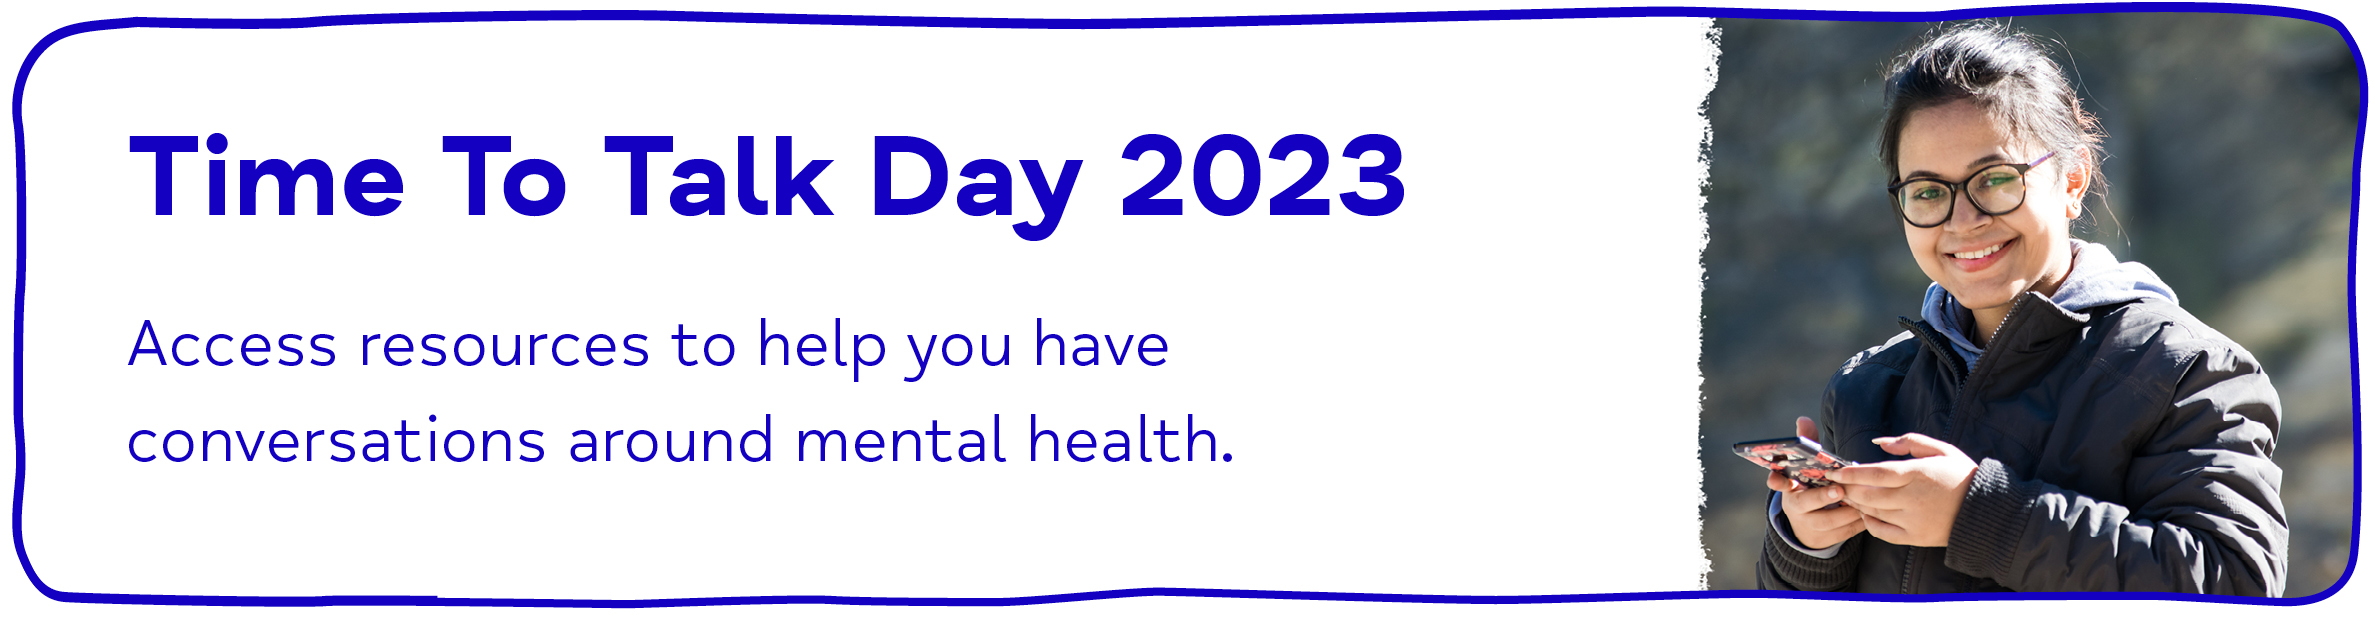 Time To Talk Day 2023 Access resources to help you have conversations around mental health.